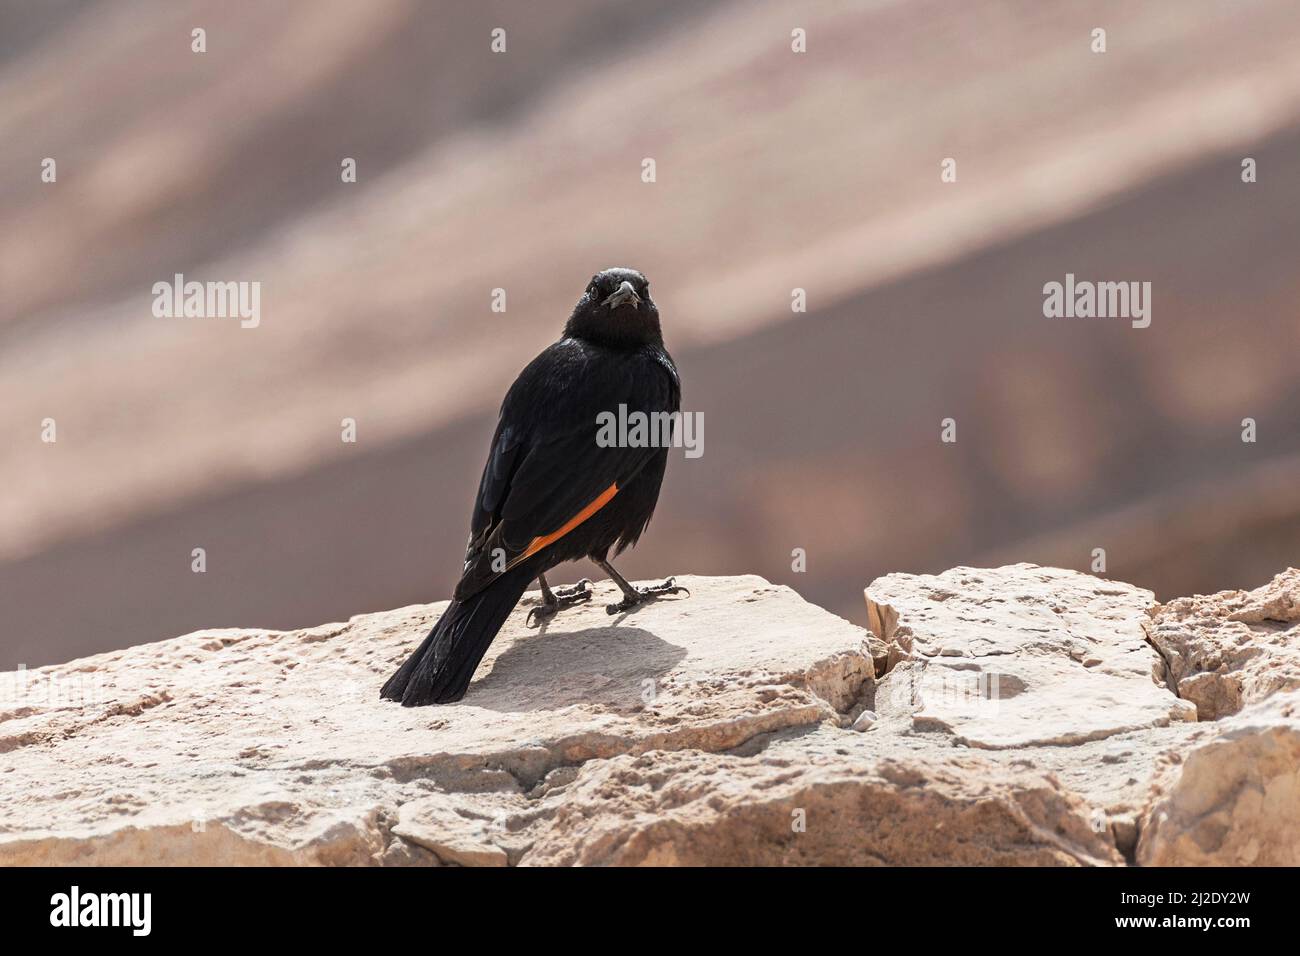 male Tristram's starling Onychognathus tristramii bird staring at the camera on Scorpion Ascent in Israel with a blurred pinkish mountainside Stock Photo